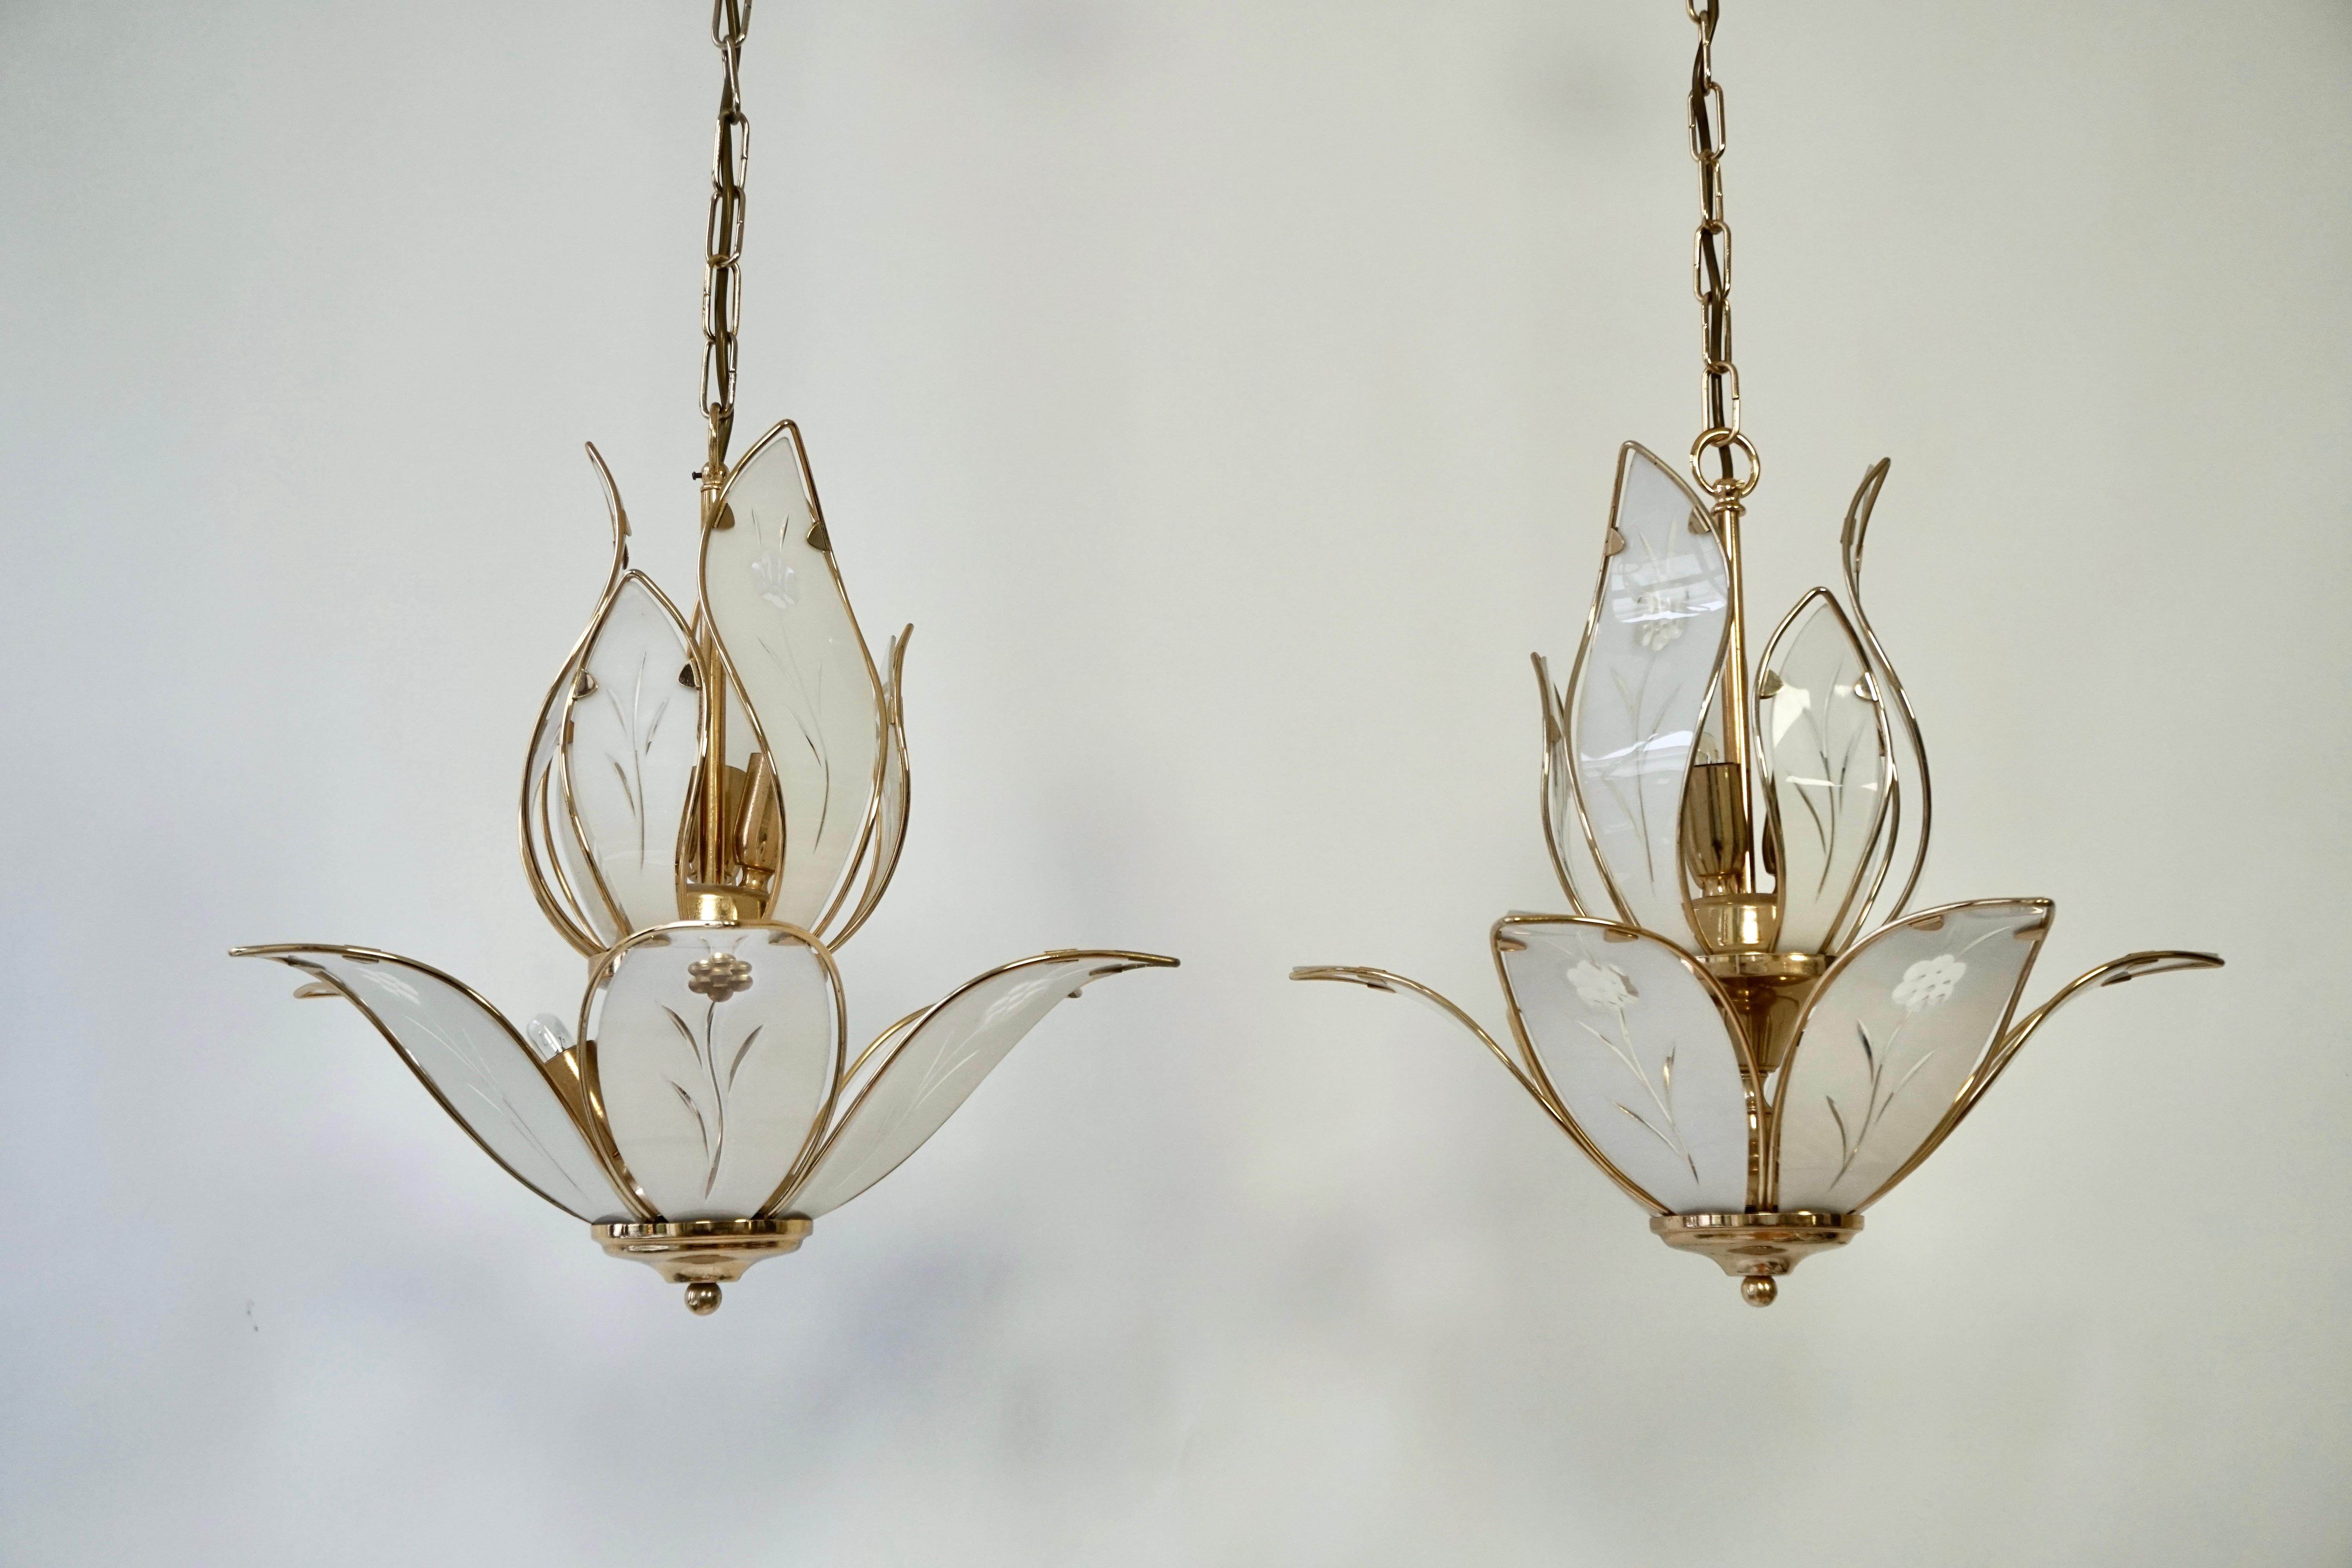 Three Lotus Flower and Brass Glass Chandeliers In Good Condition For Sale In Antwerp, BE